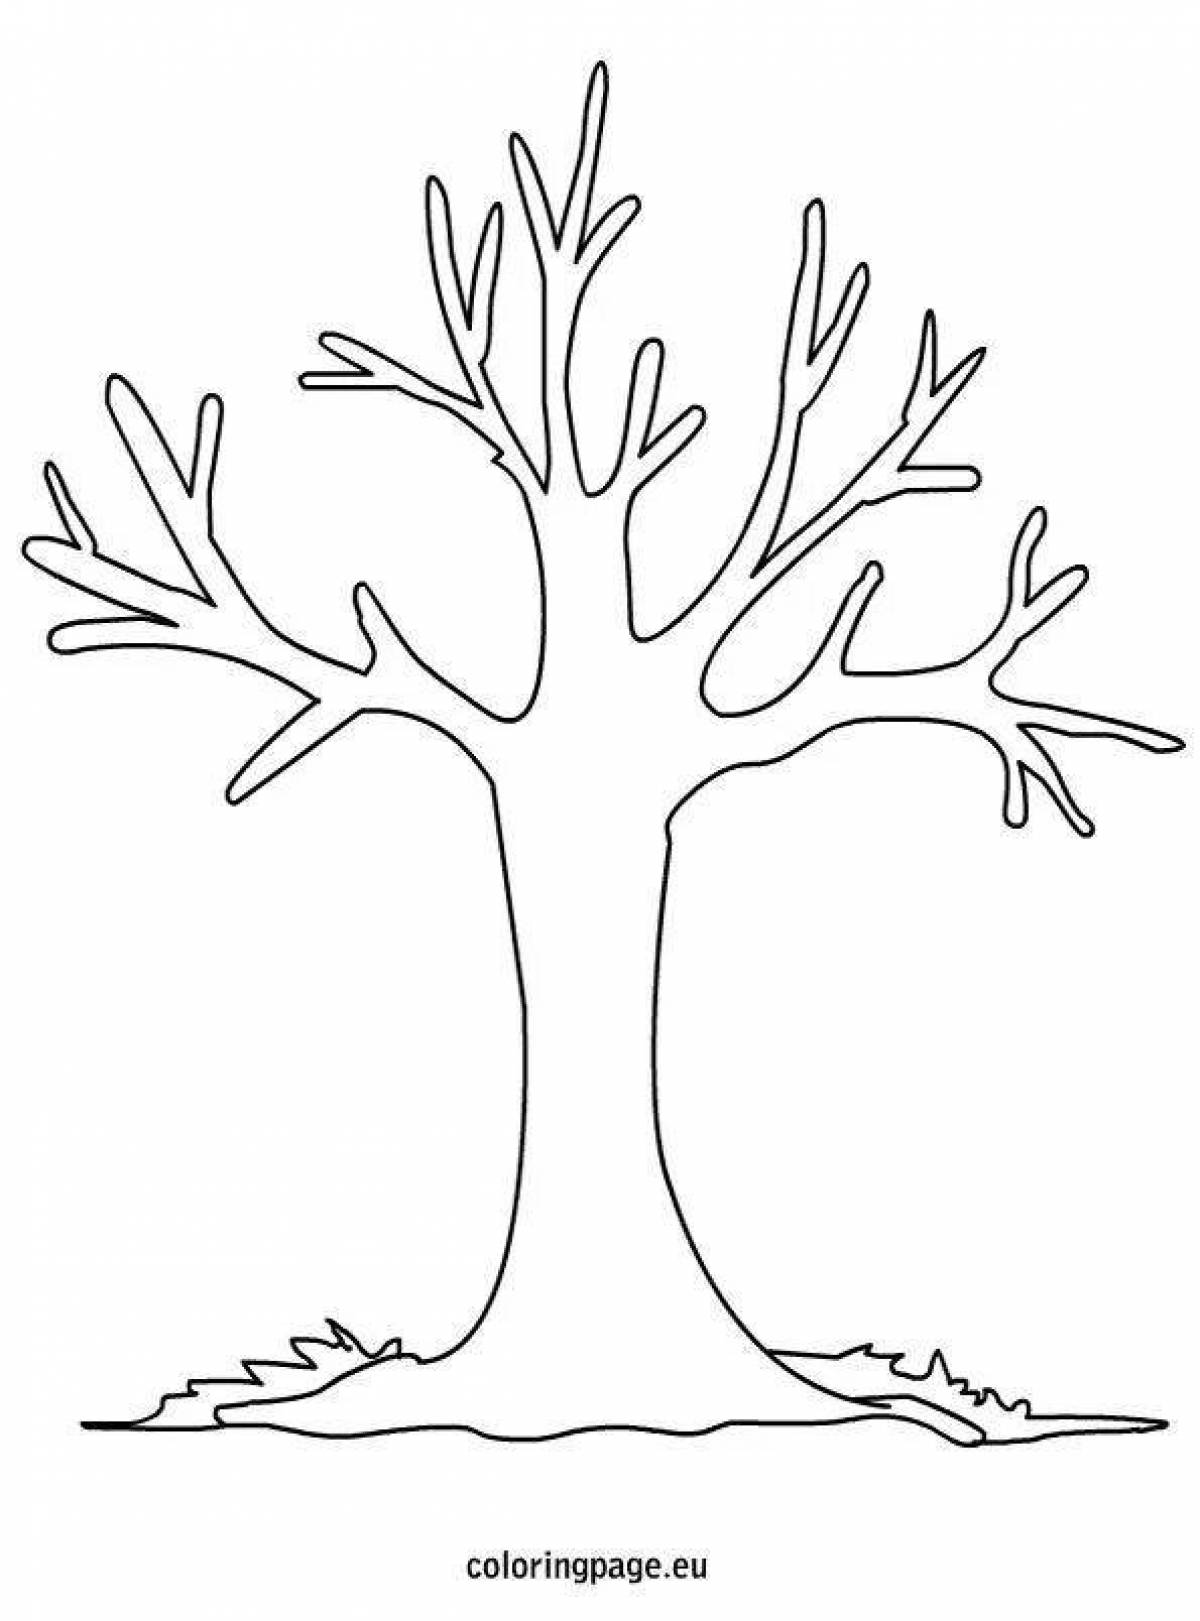 Fancy tree coloring page